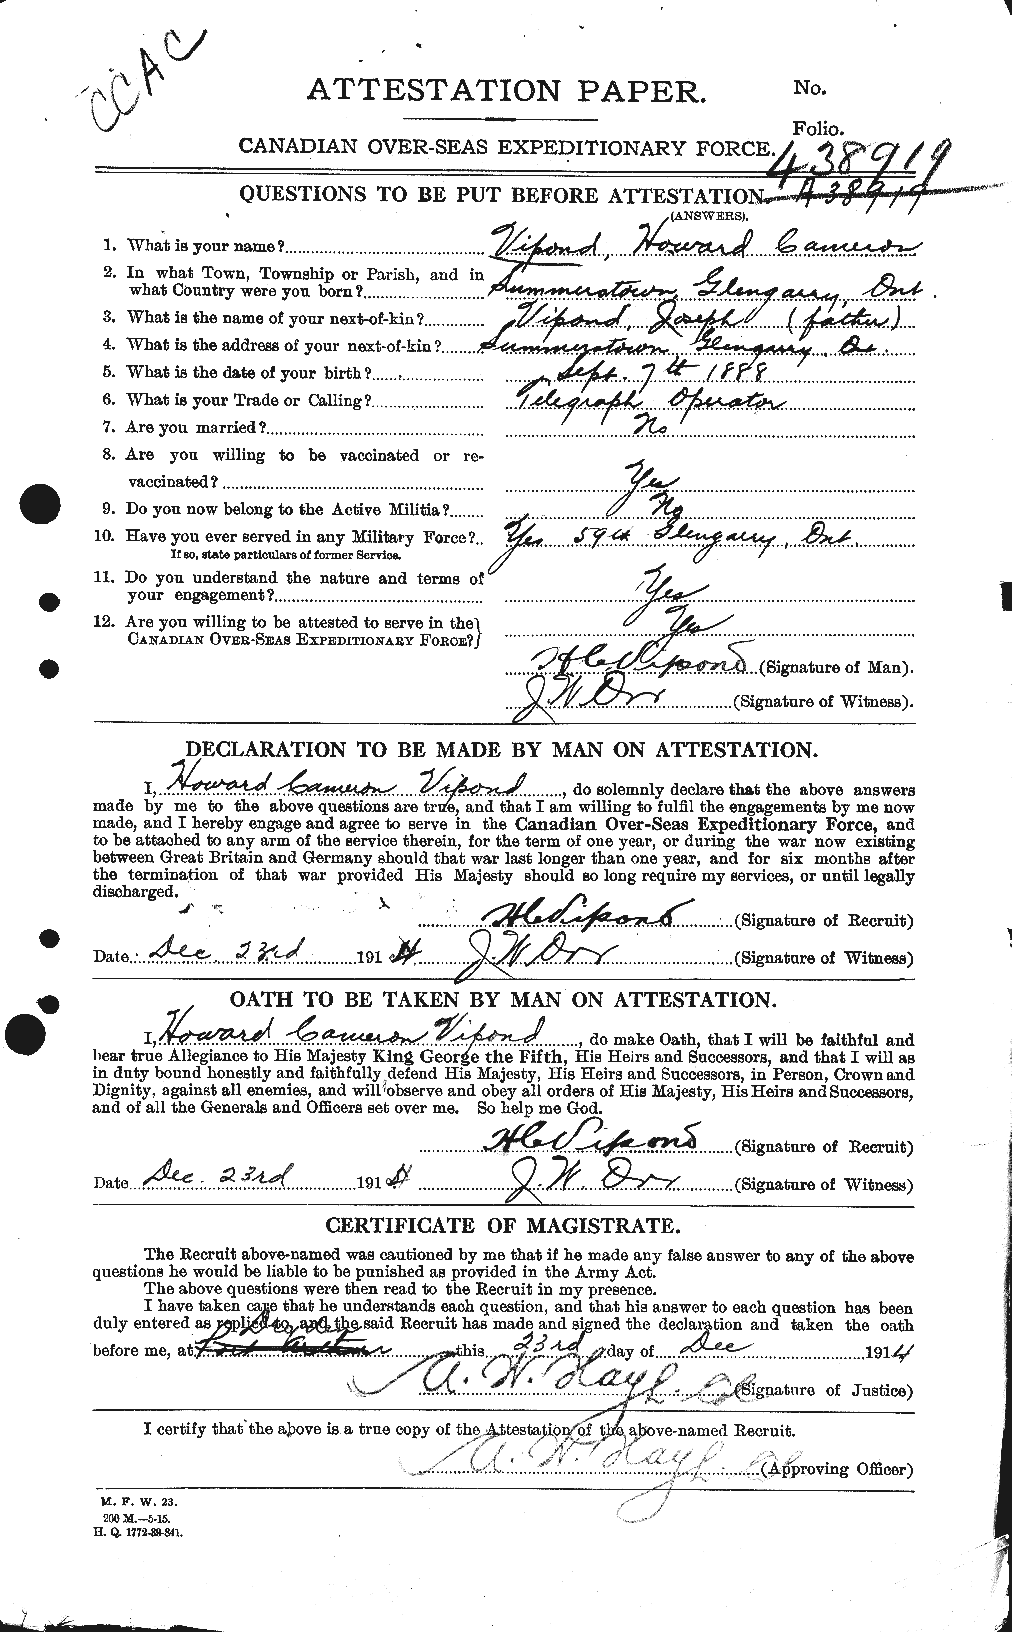 Personnel Records of the First World War - CEF 648728a